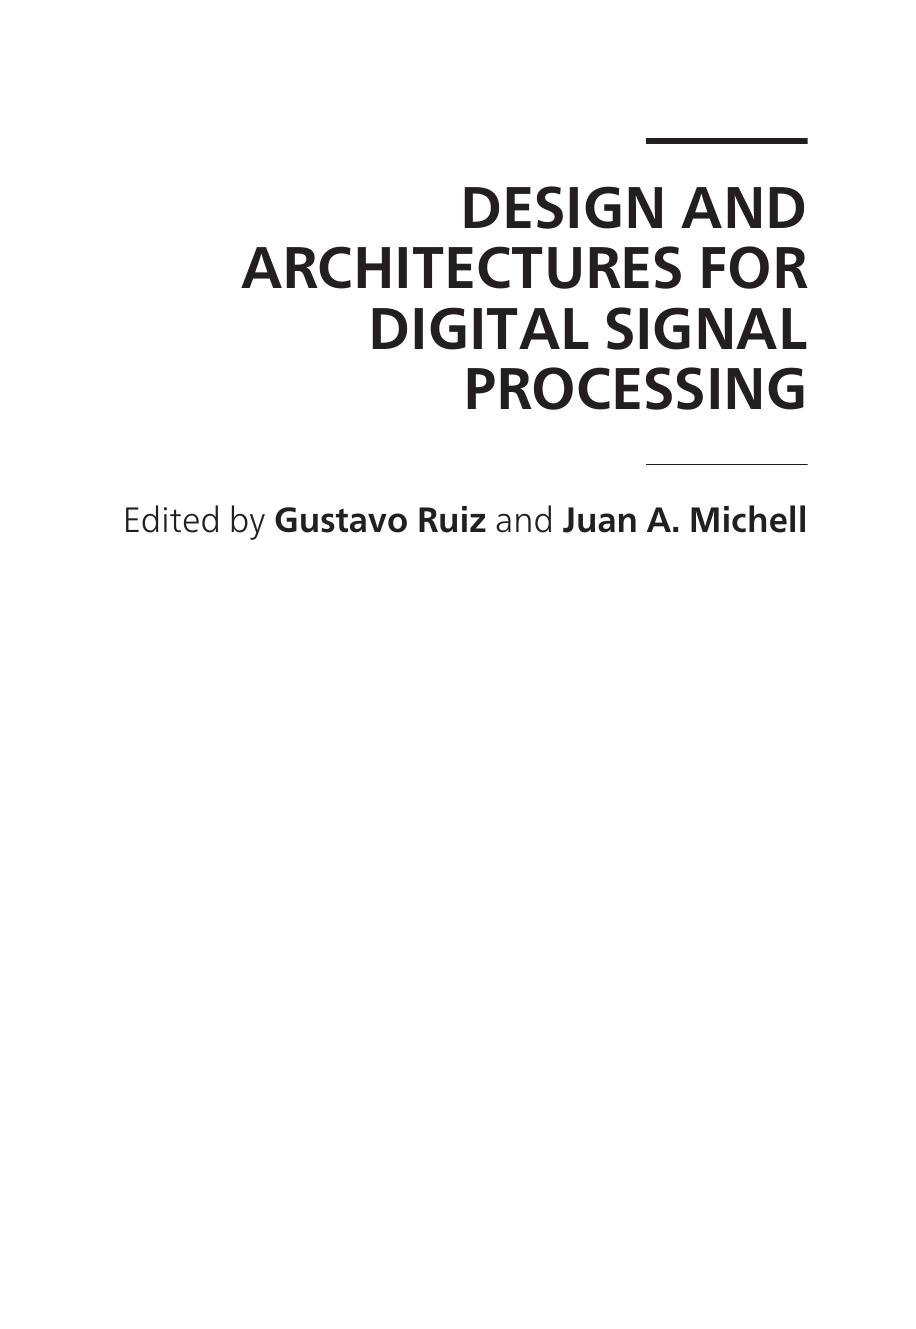 Design and Architectures for Digital Signal Processing 2013.pdf